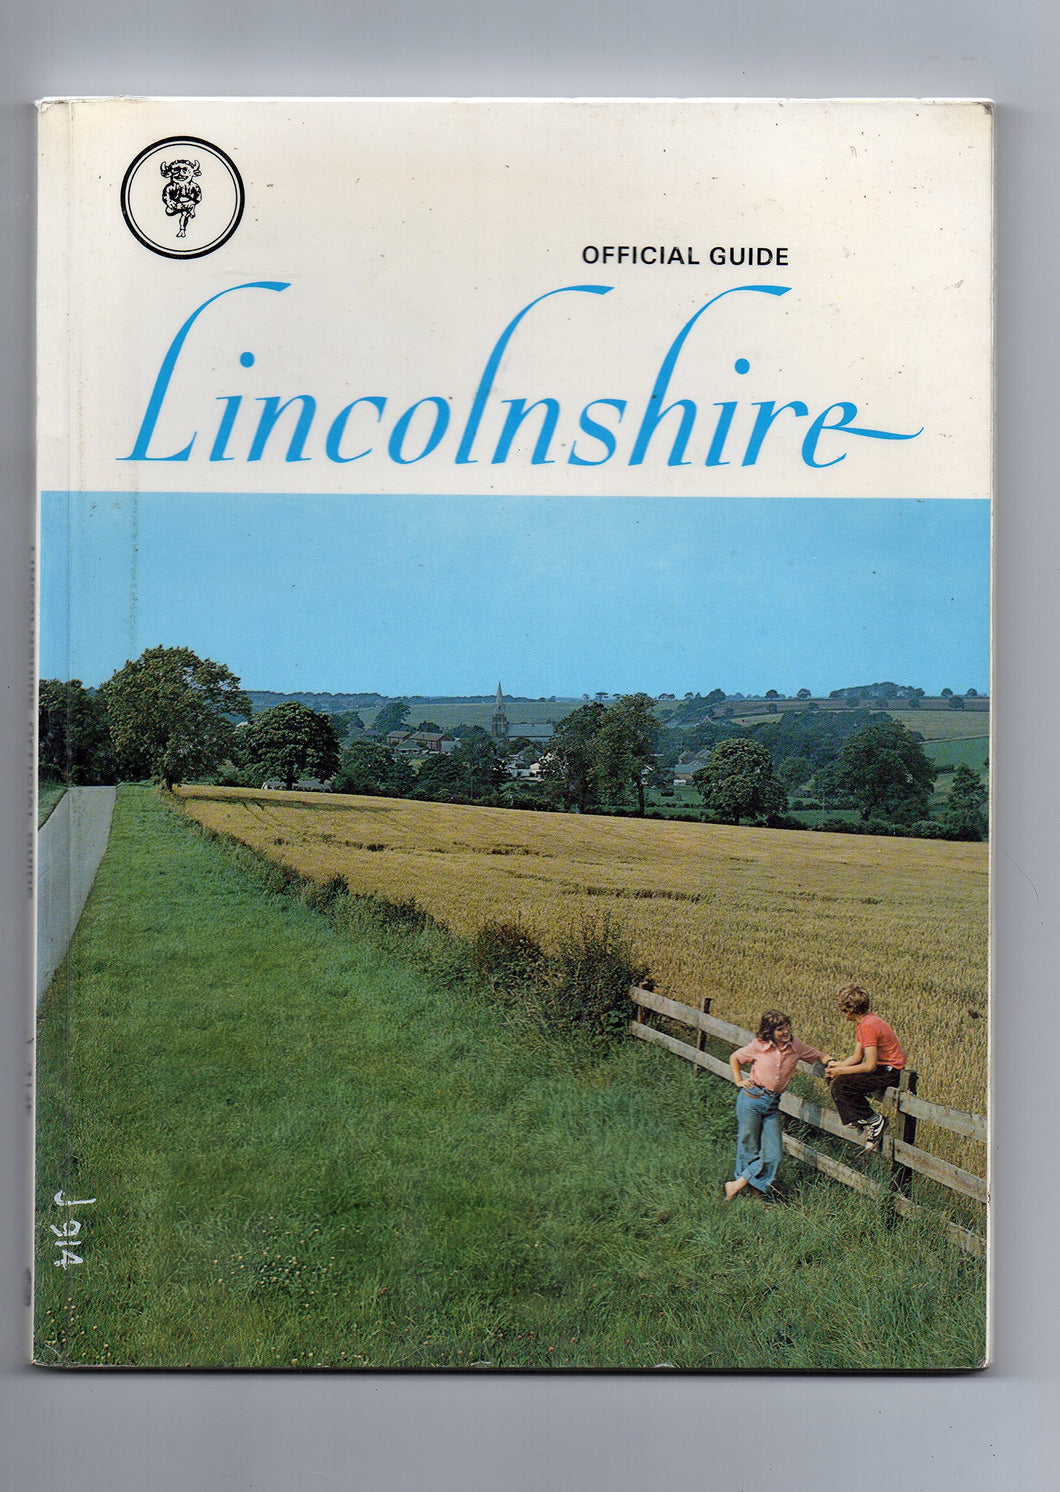 Official Guide - Lincolnshire - 1985 Philip Newton and Lincolnshire County Council